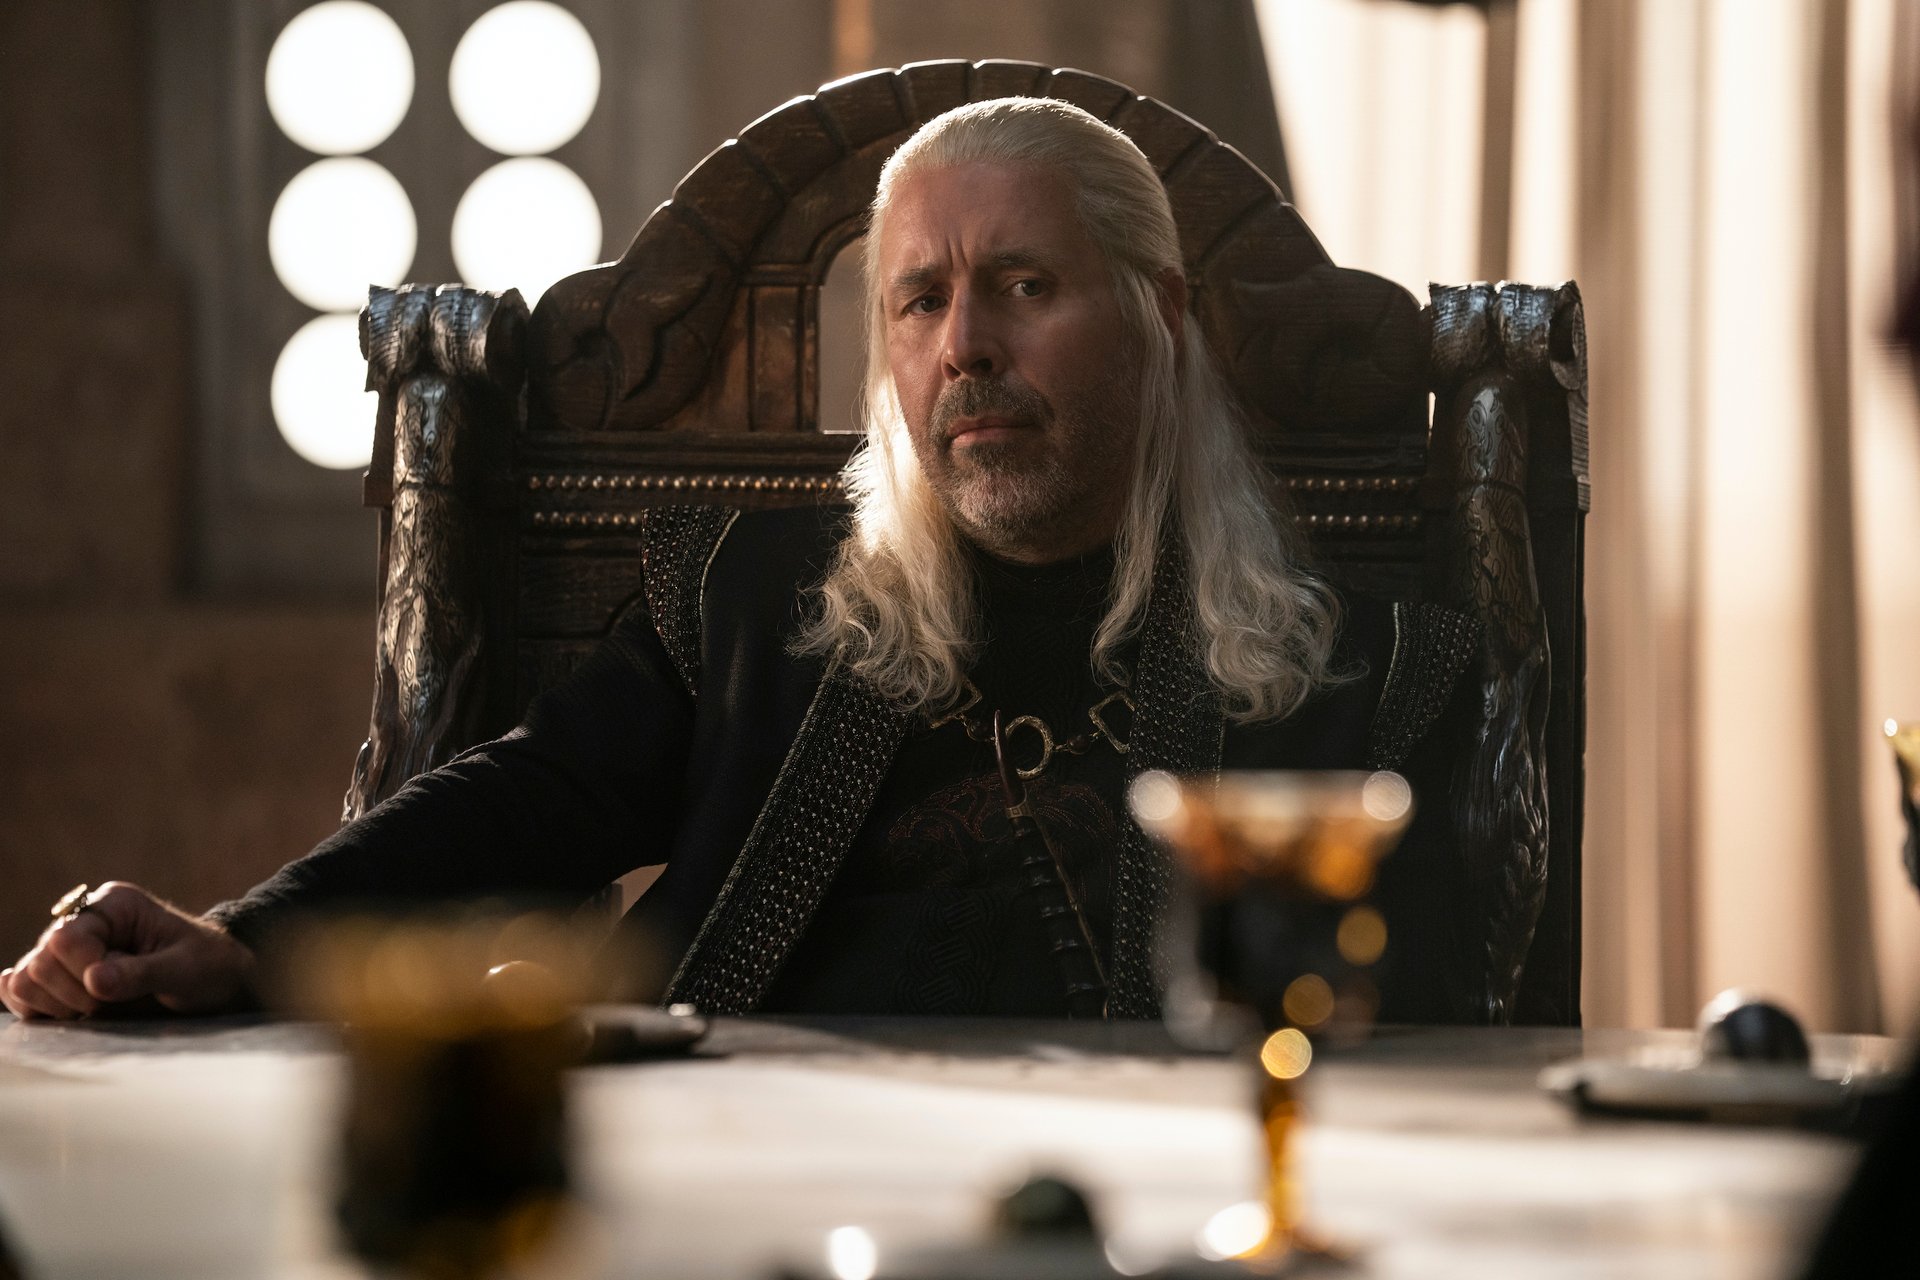 Paddy Considine as King Viserys Targaryen in 'House of the Dragon' from HBO